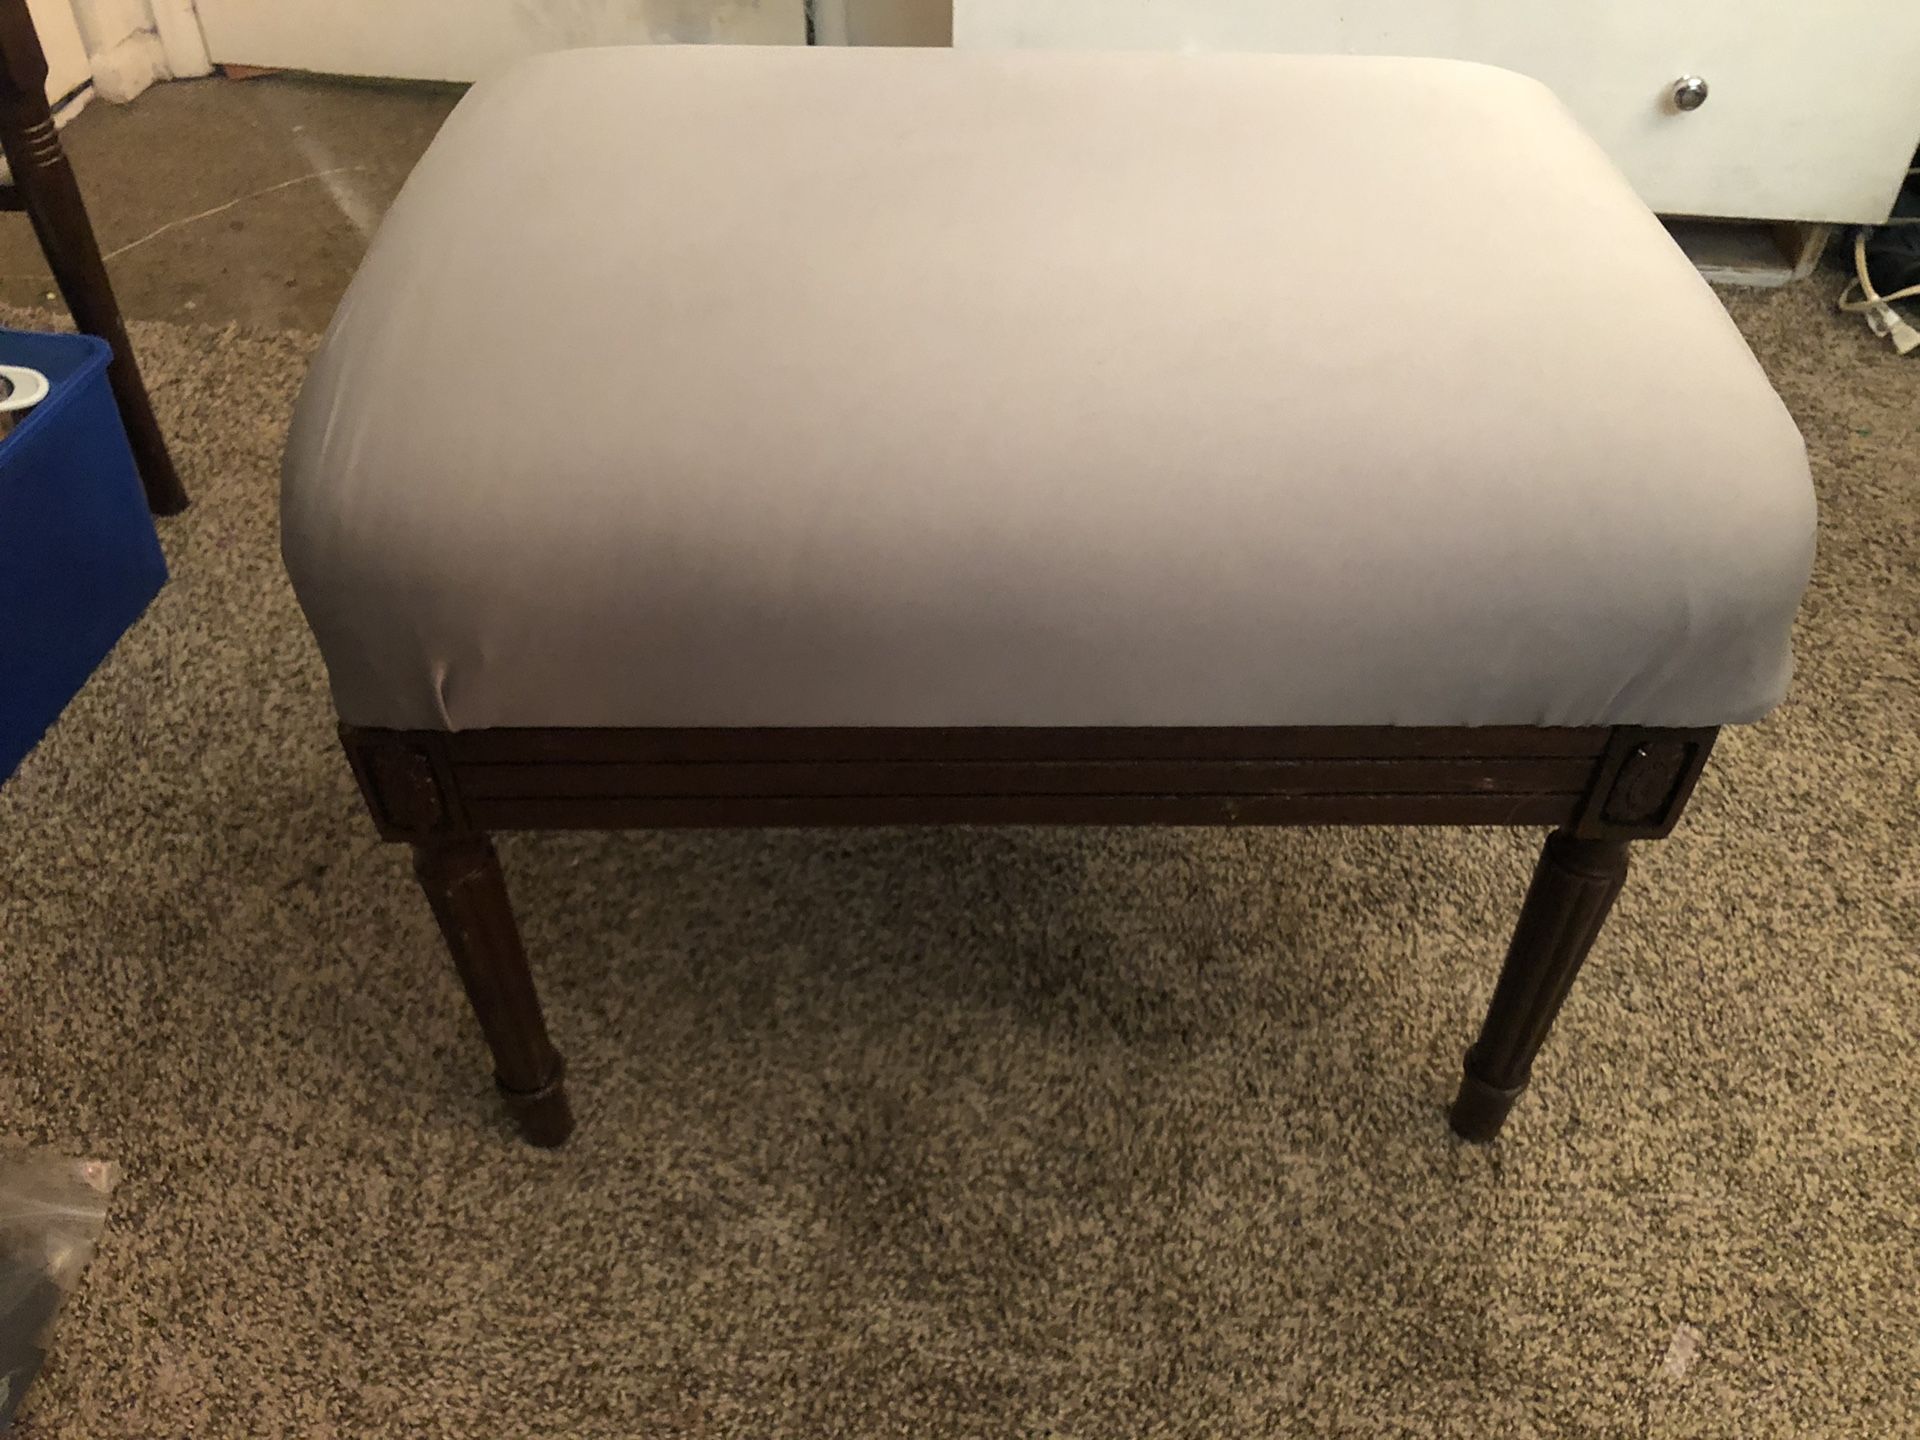 Antique gray and wooden Ottoman